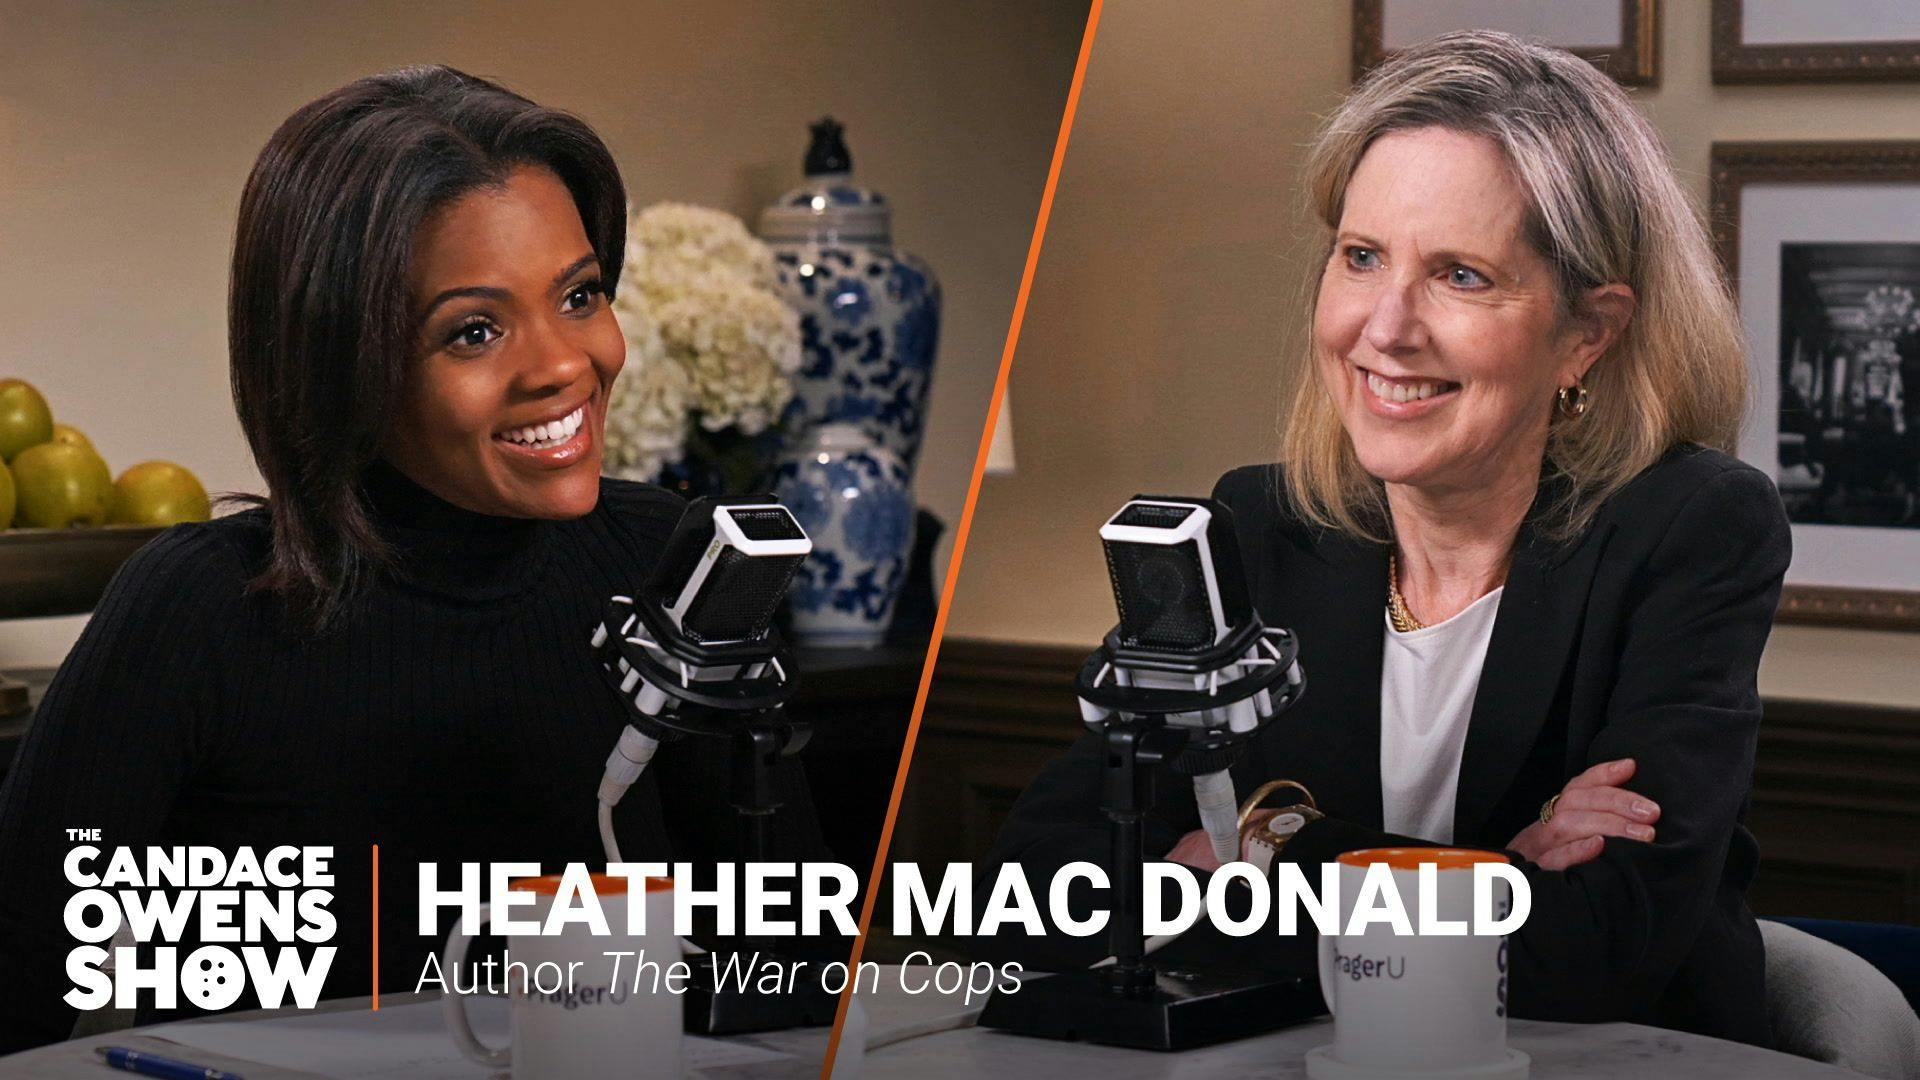 The Candace Owens Show: Heather Mac Donald